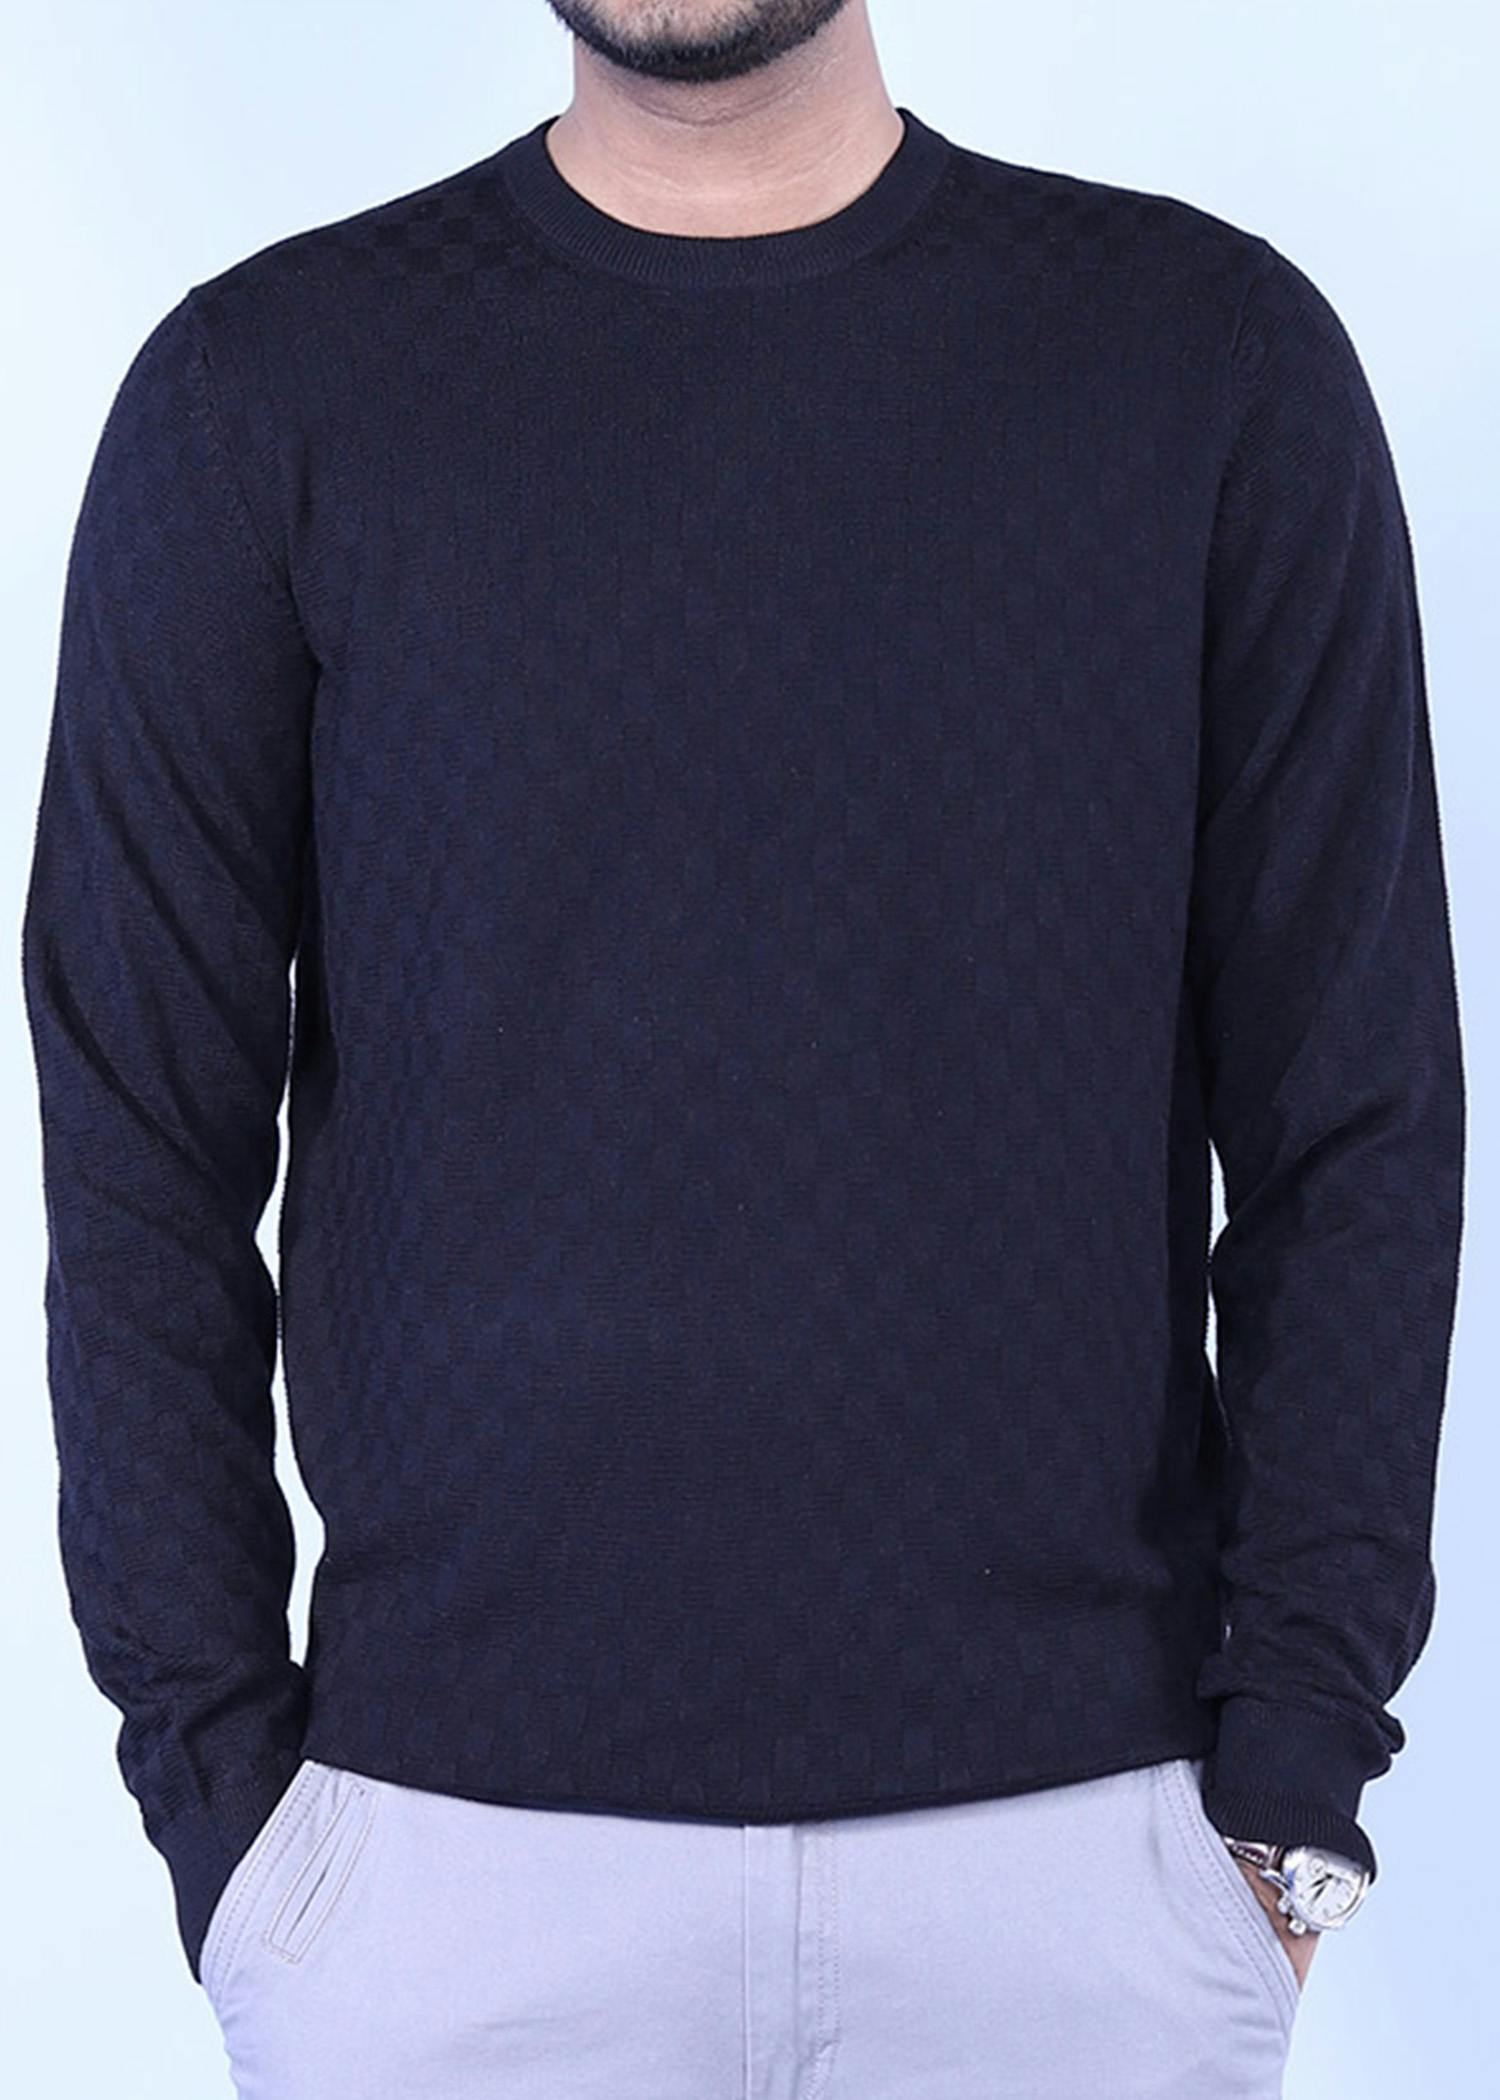 hillstar vii sweater black color head cropped